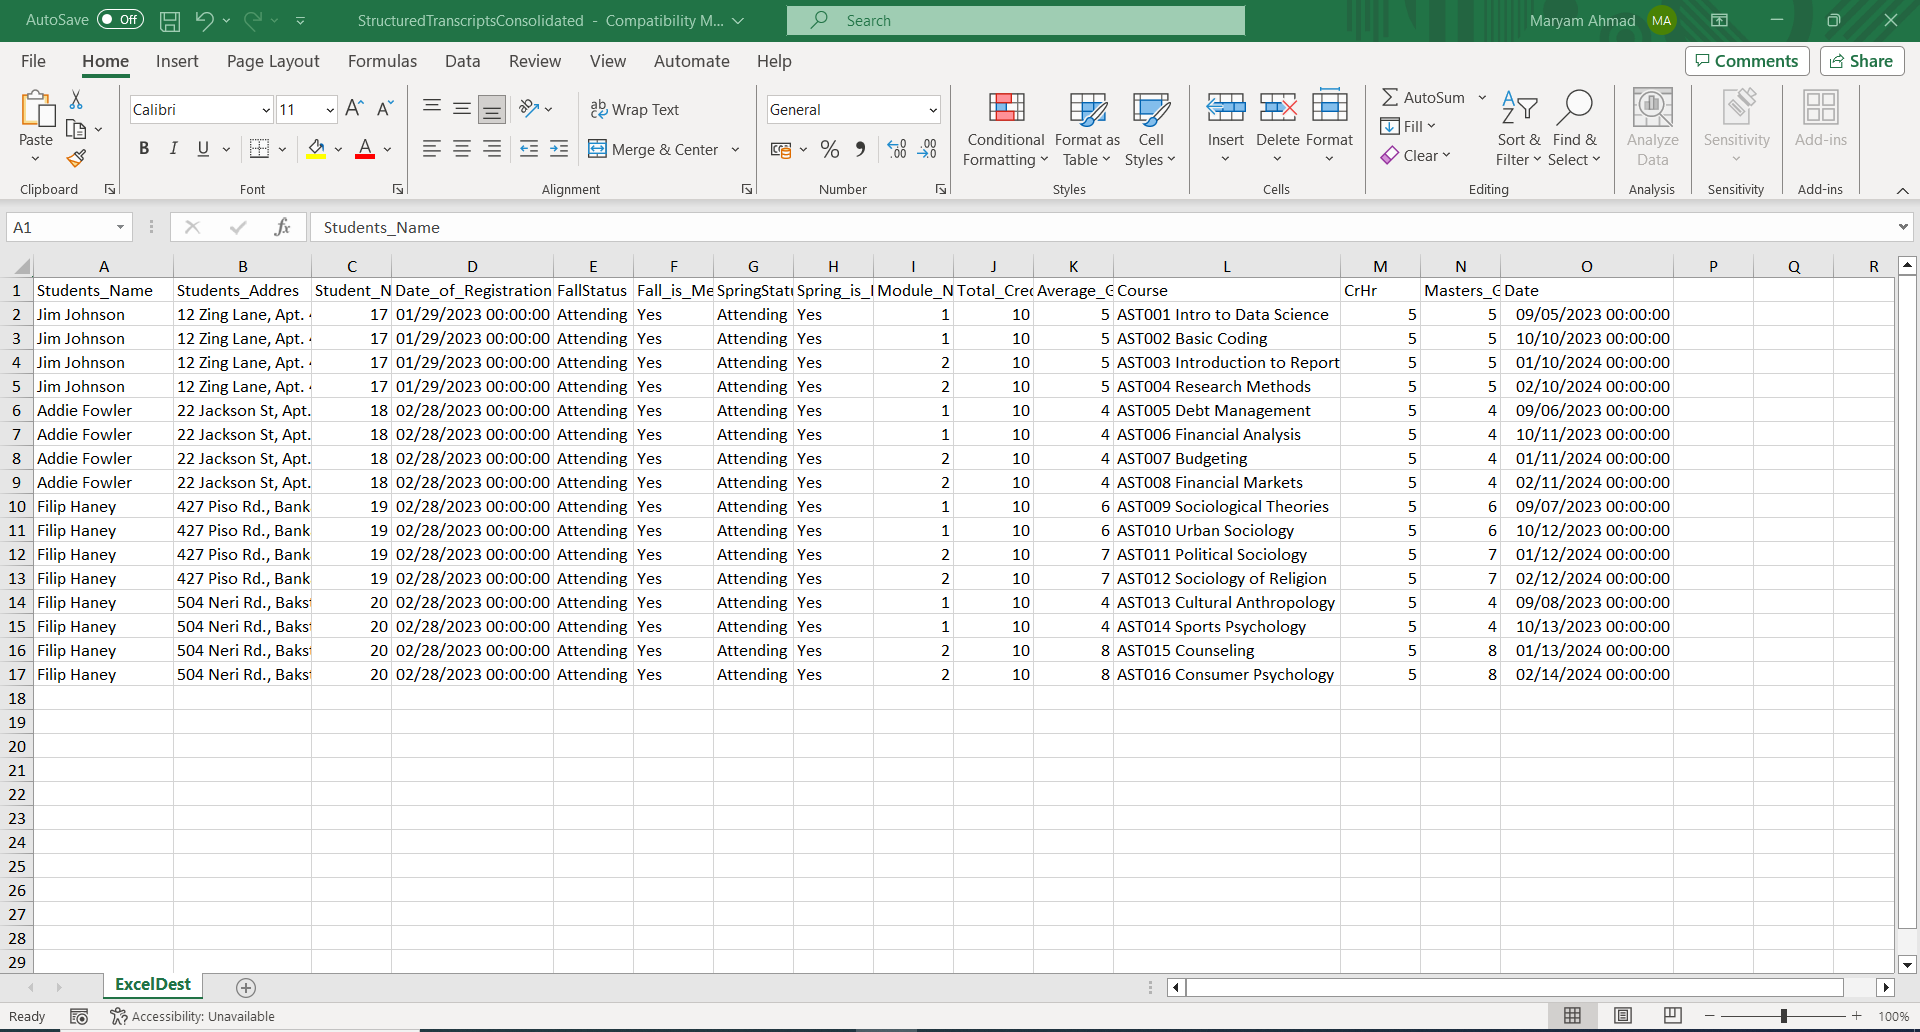 Data extracted to an Excel workbook after transcript processing.